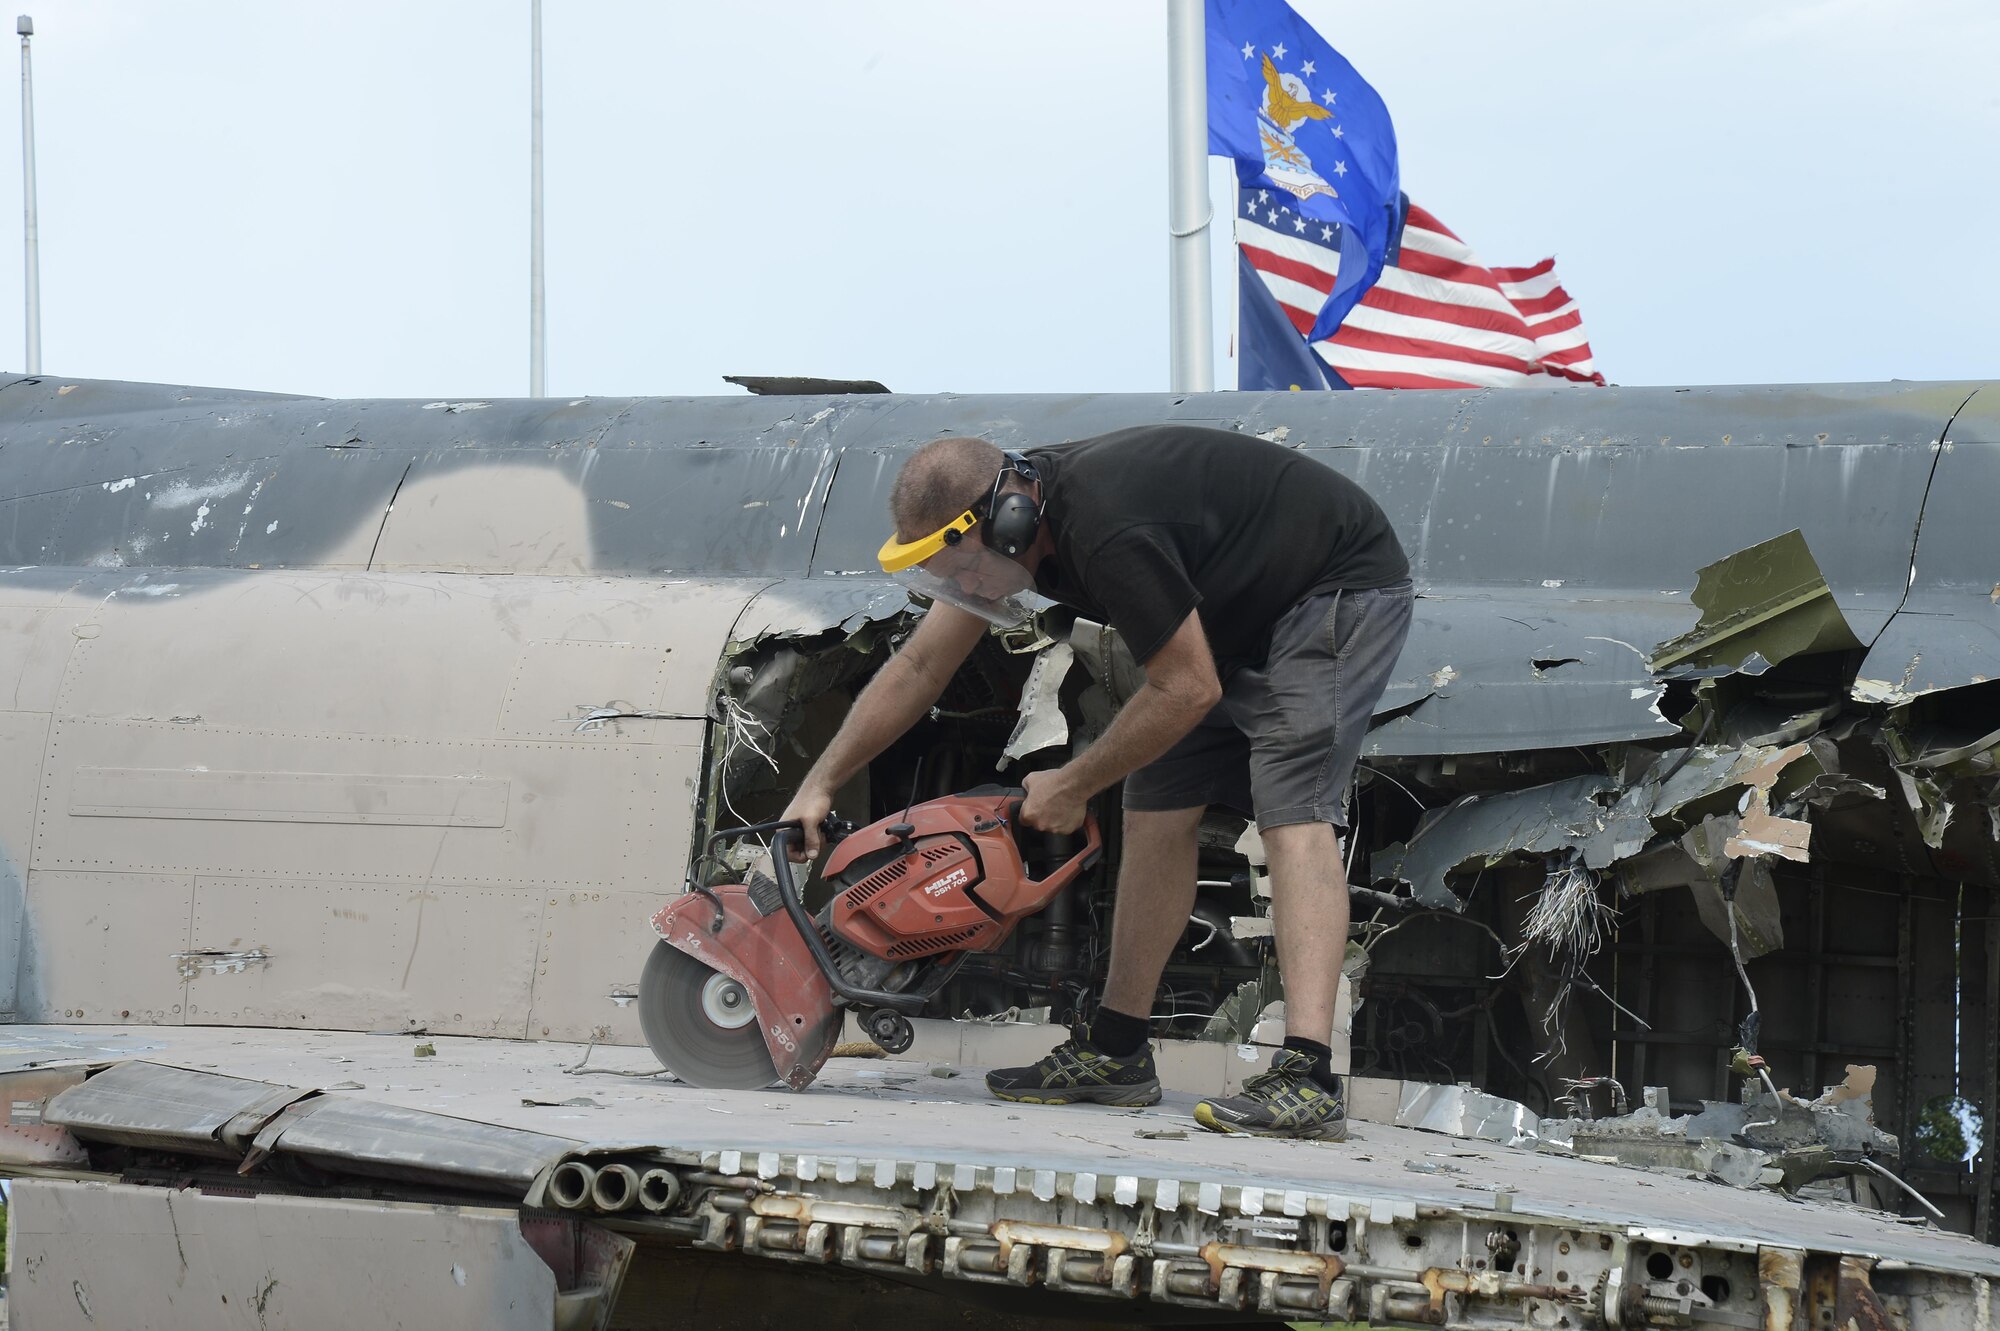 Contractors tear down the F-4 Phantom, Sept. 29, 2016, in Memorial Air Park at MacDill Air Force Base, Fla. The tear down was scheduled to be a two-week process. (U.S. Air Force photo by Senior Airman Randolph)